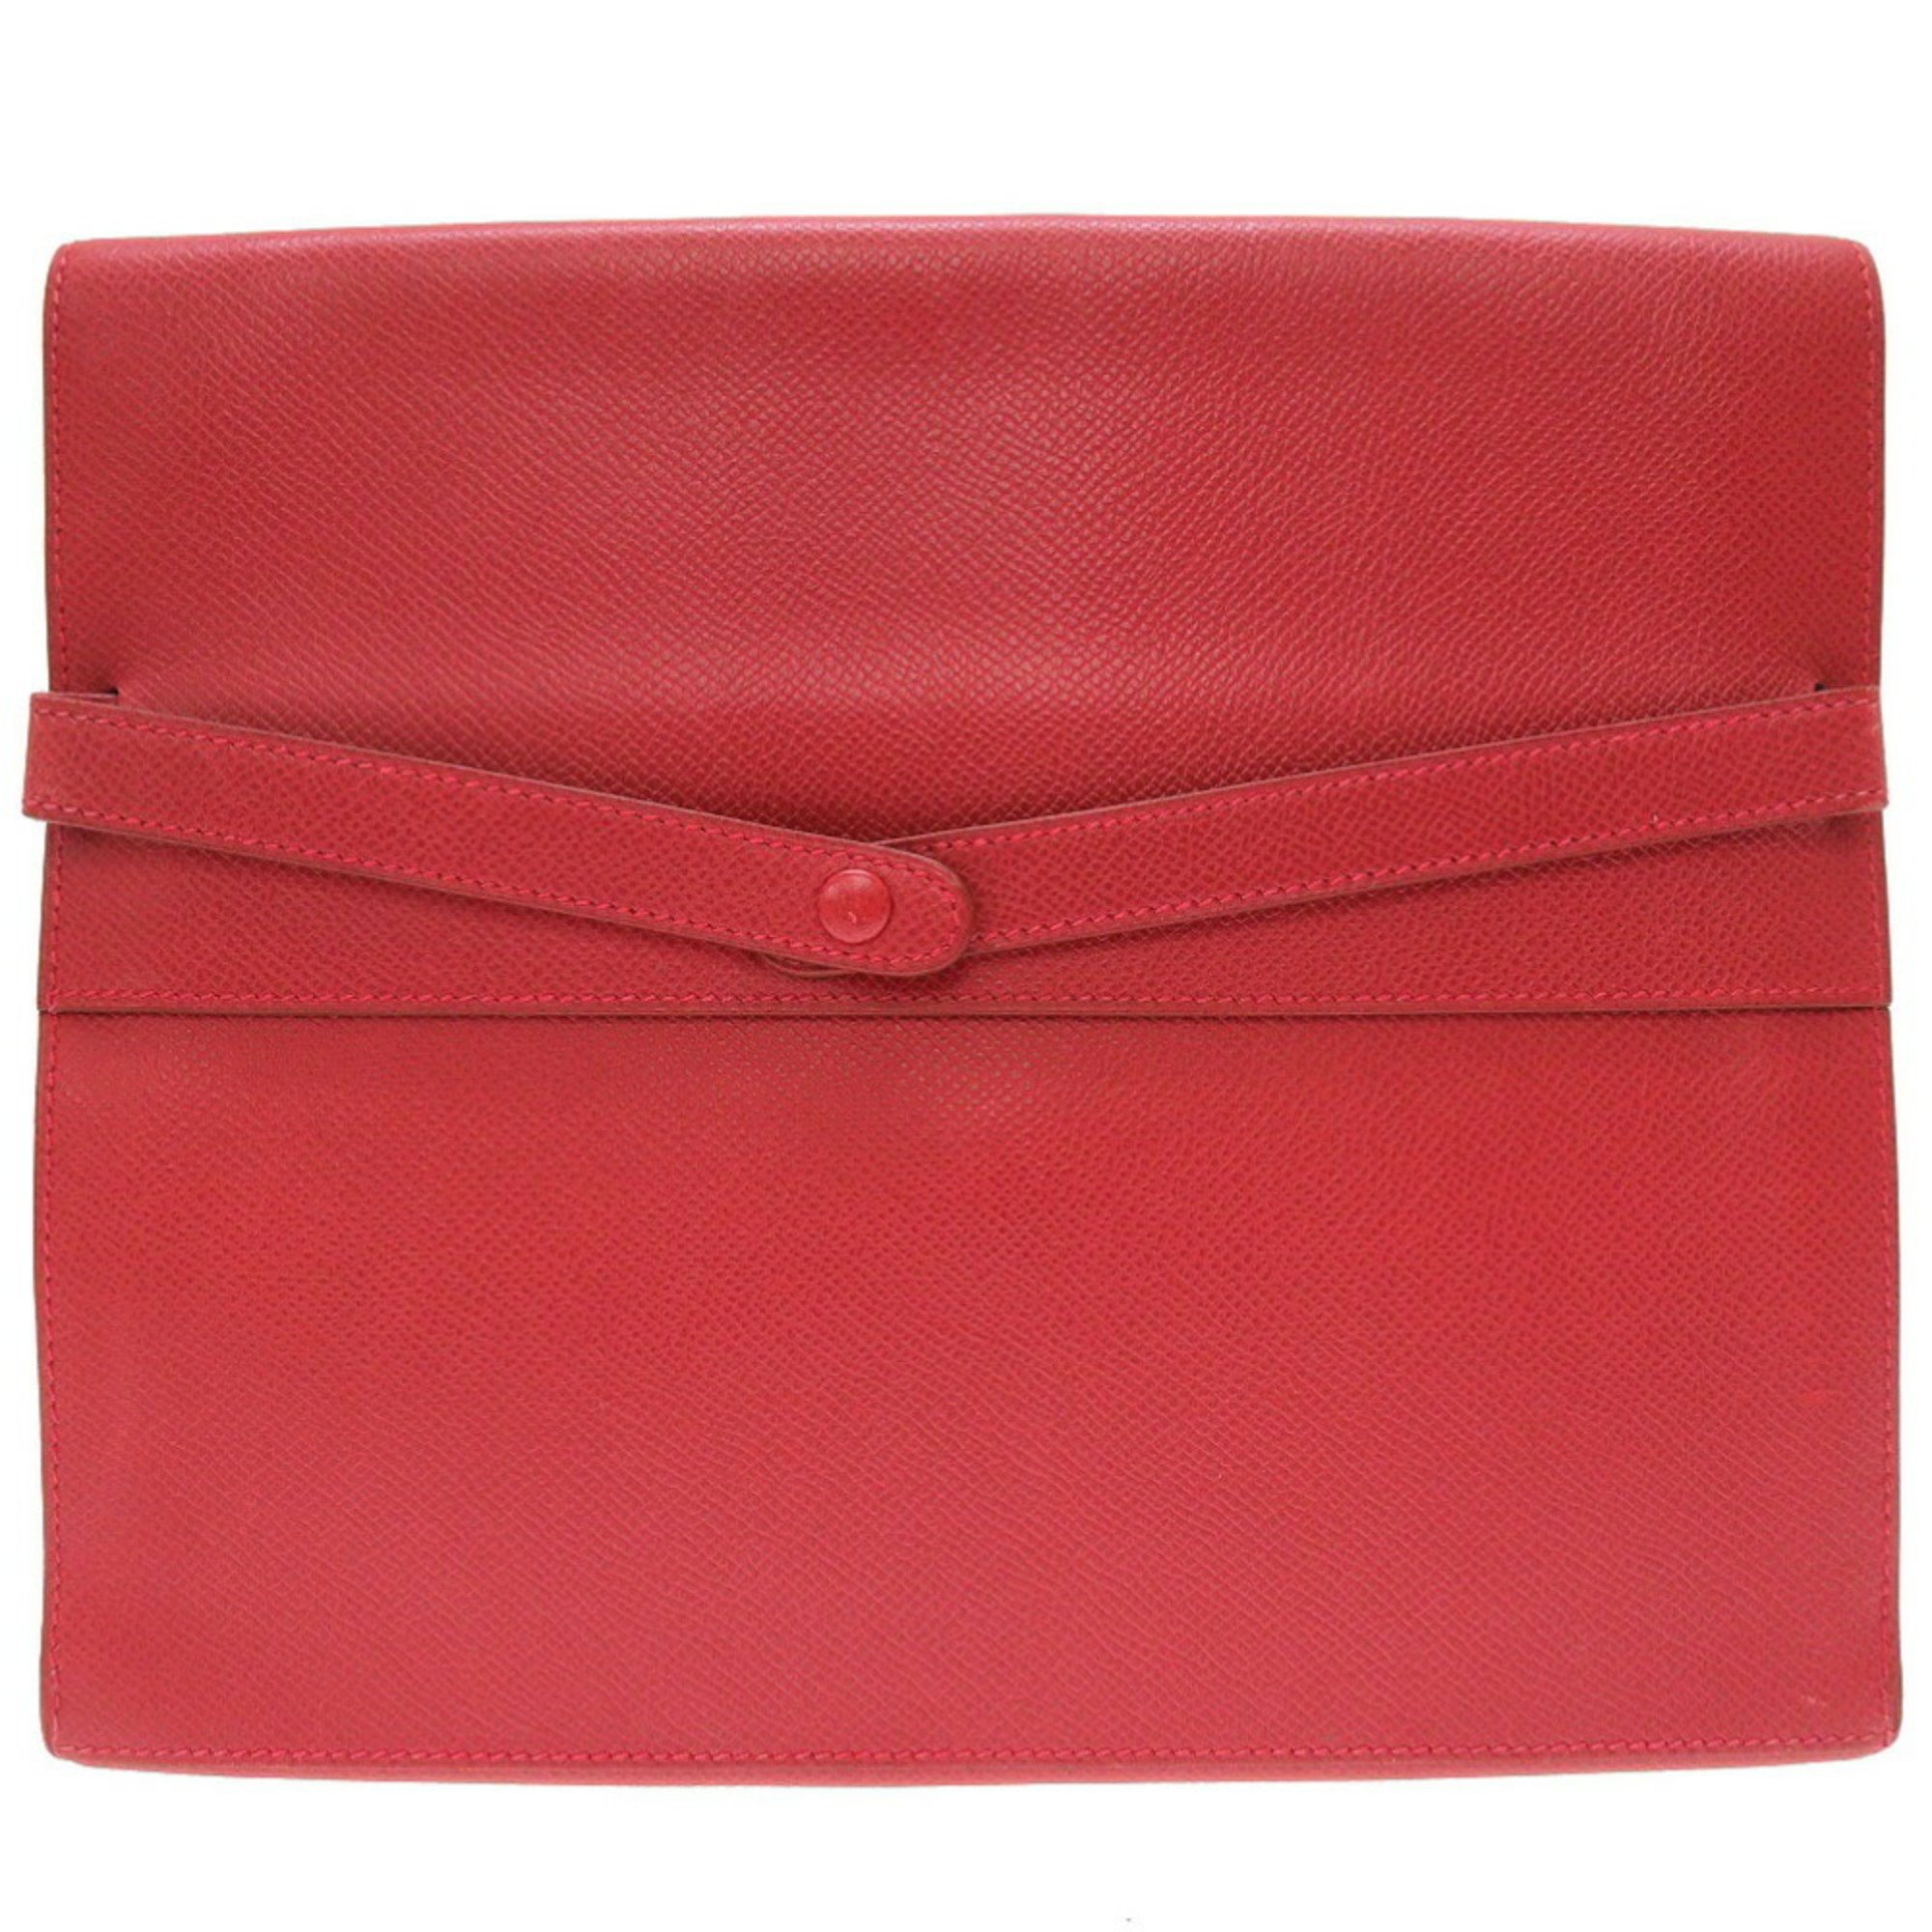 Hermes Couchevel Red 〇Z Engraved Clutch Bag 0225 HERMES Second Cup 5J0225E5